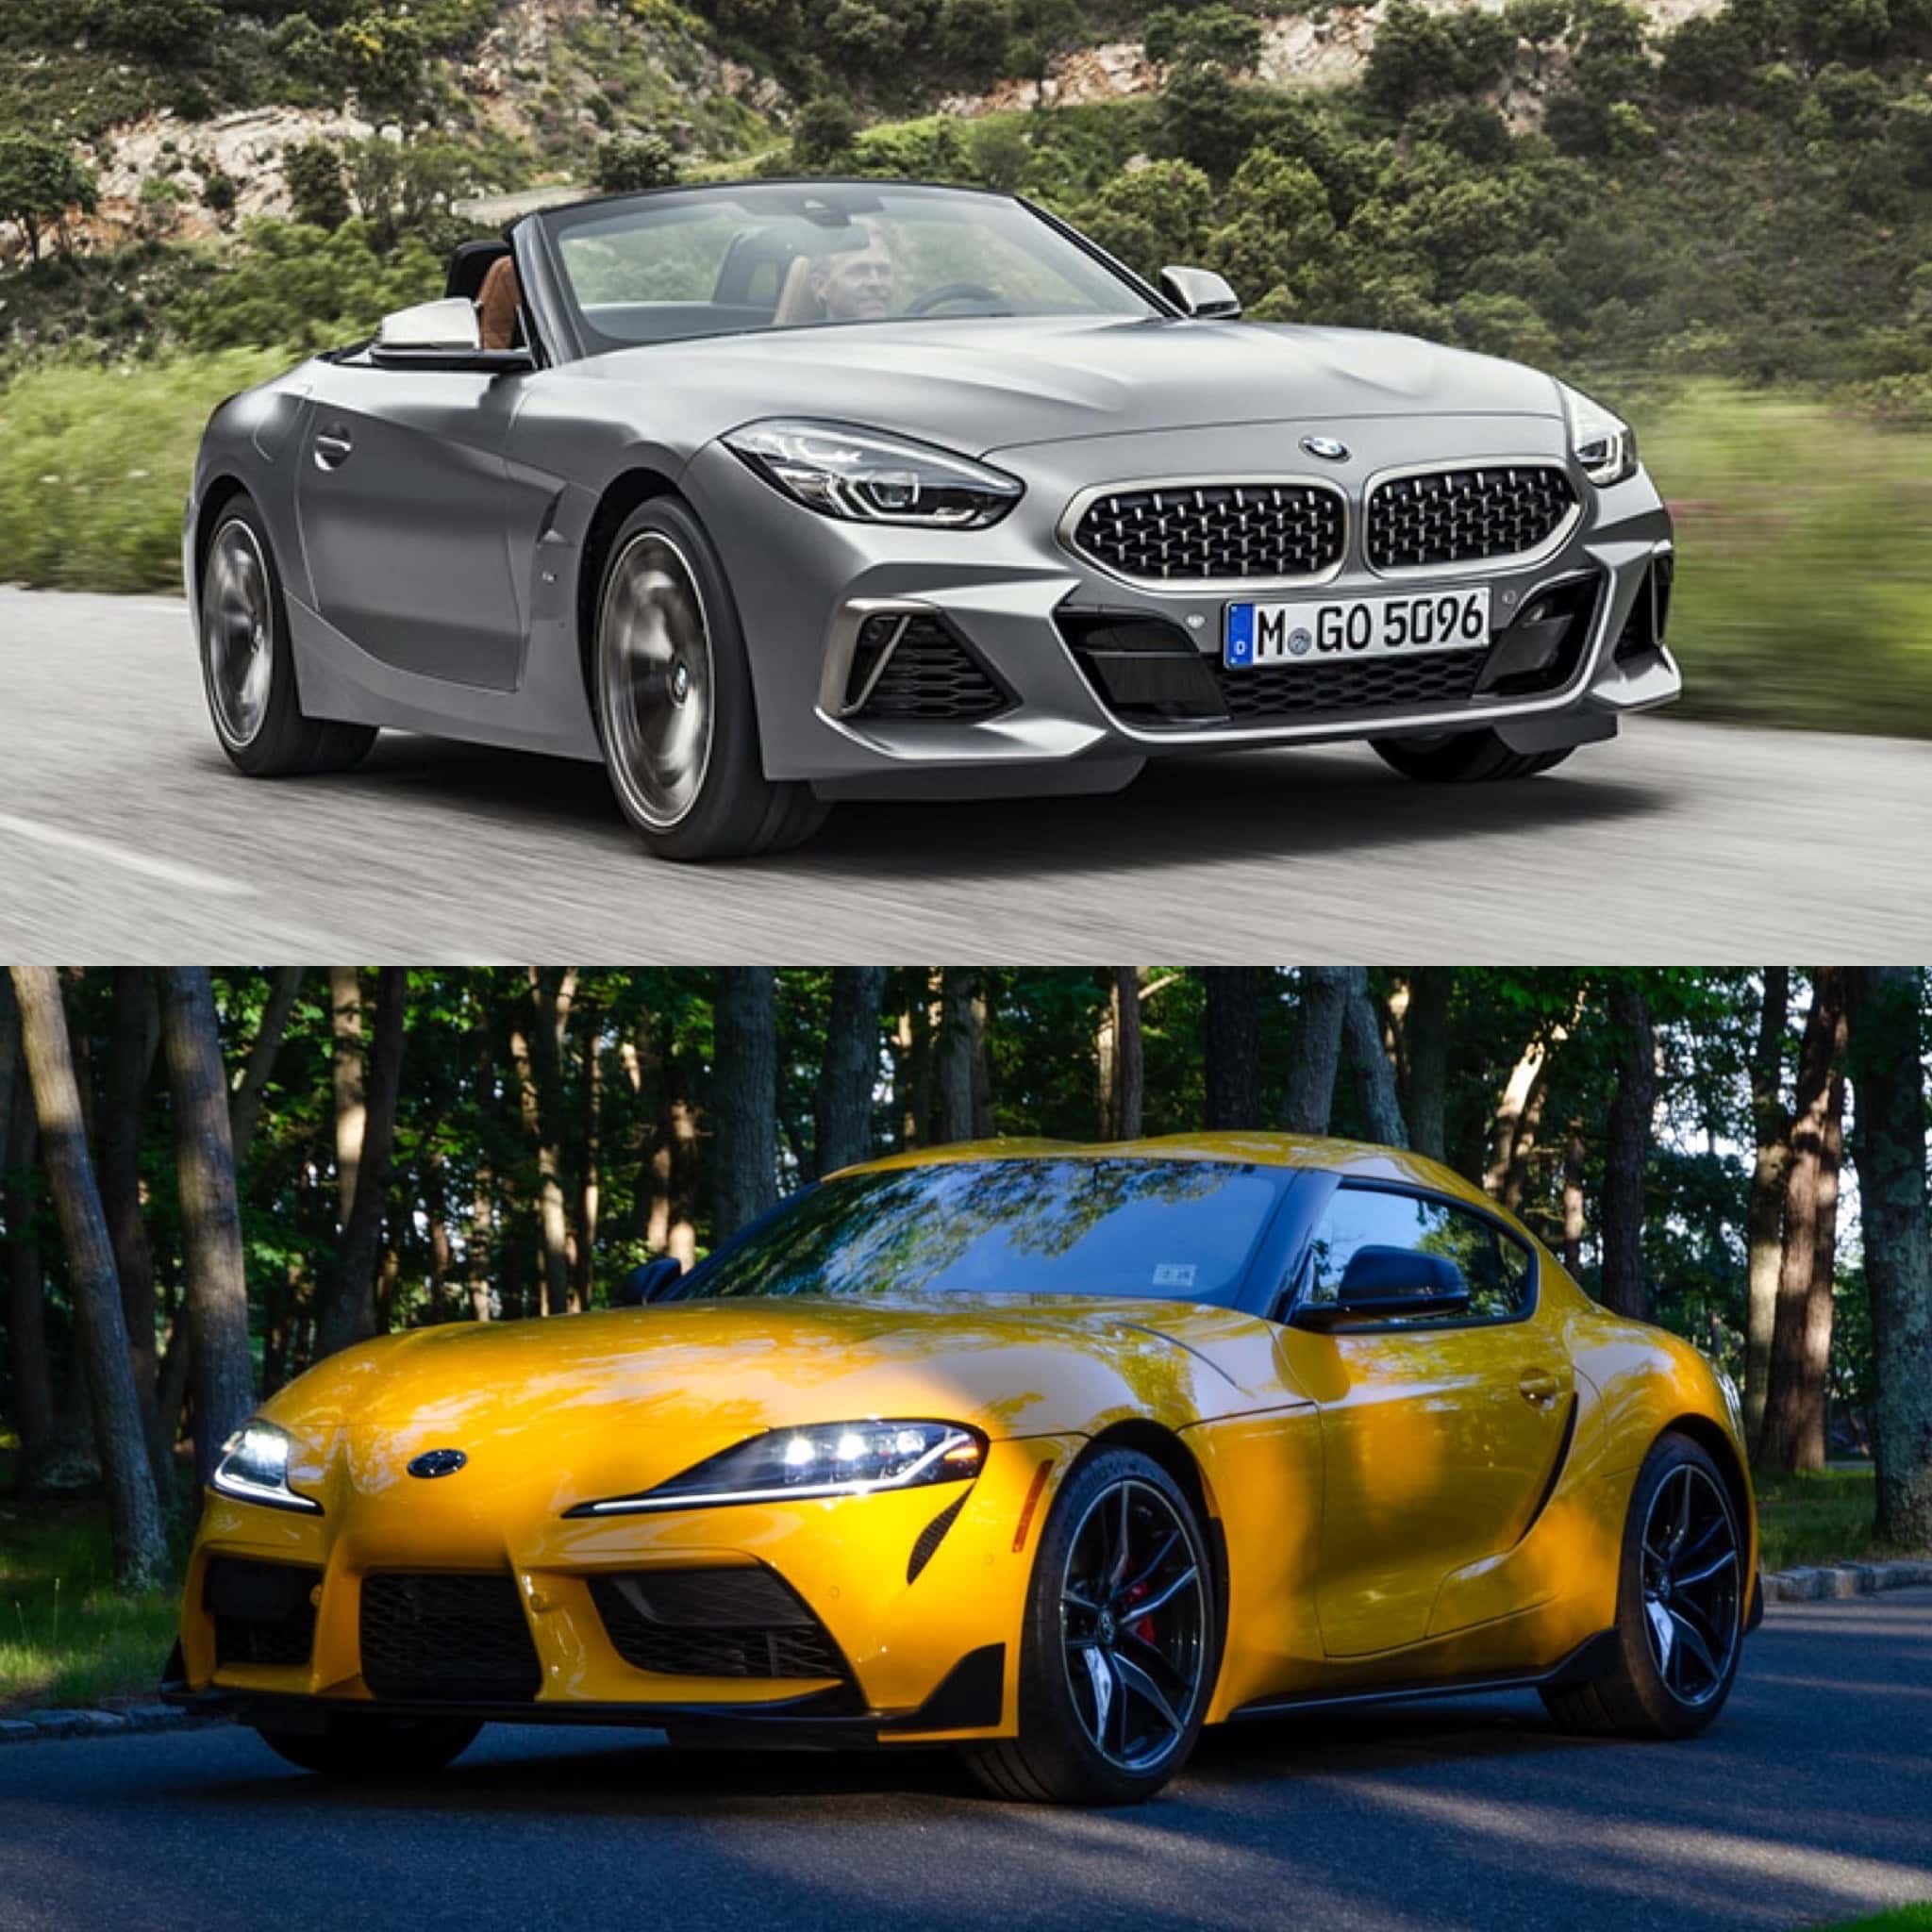 Does a Manual Gearbox Make the BMW Z4 and Toyota Supra Porsche Competitors Now?